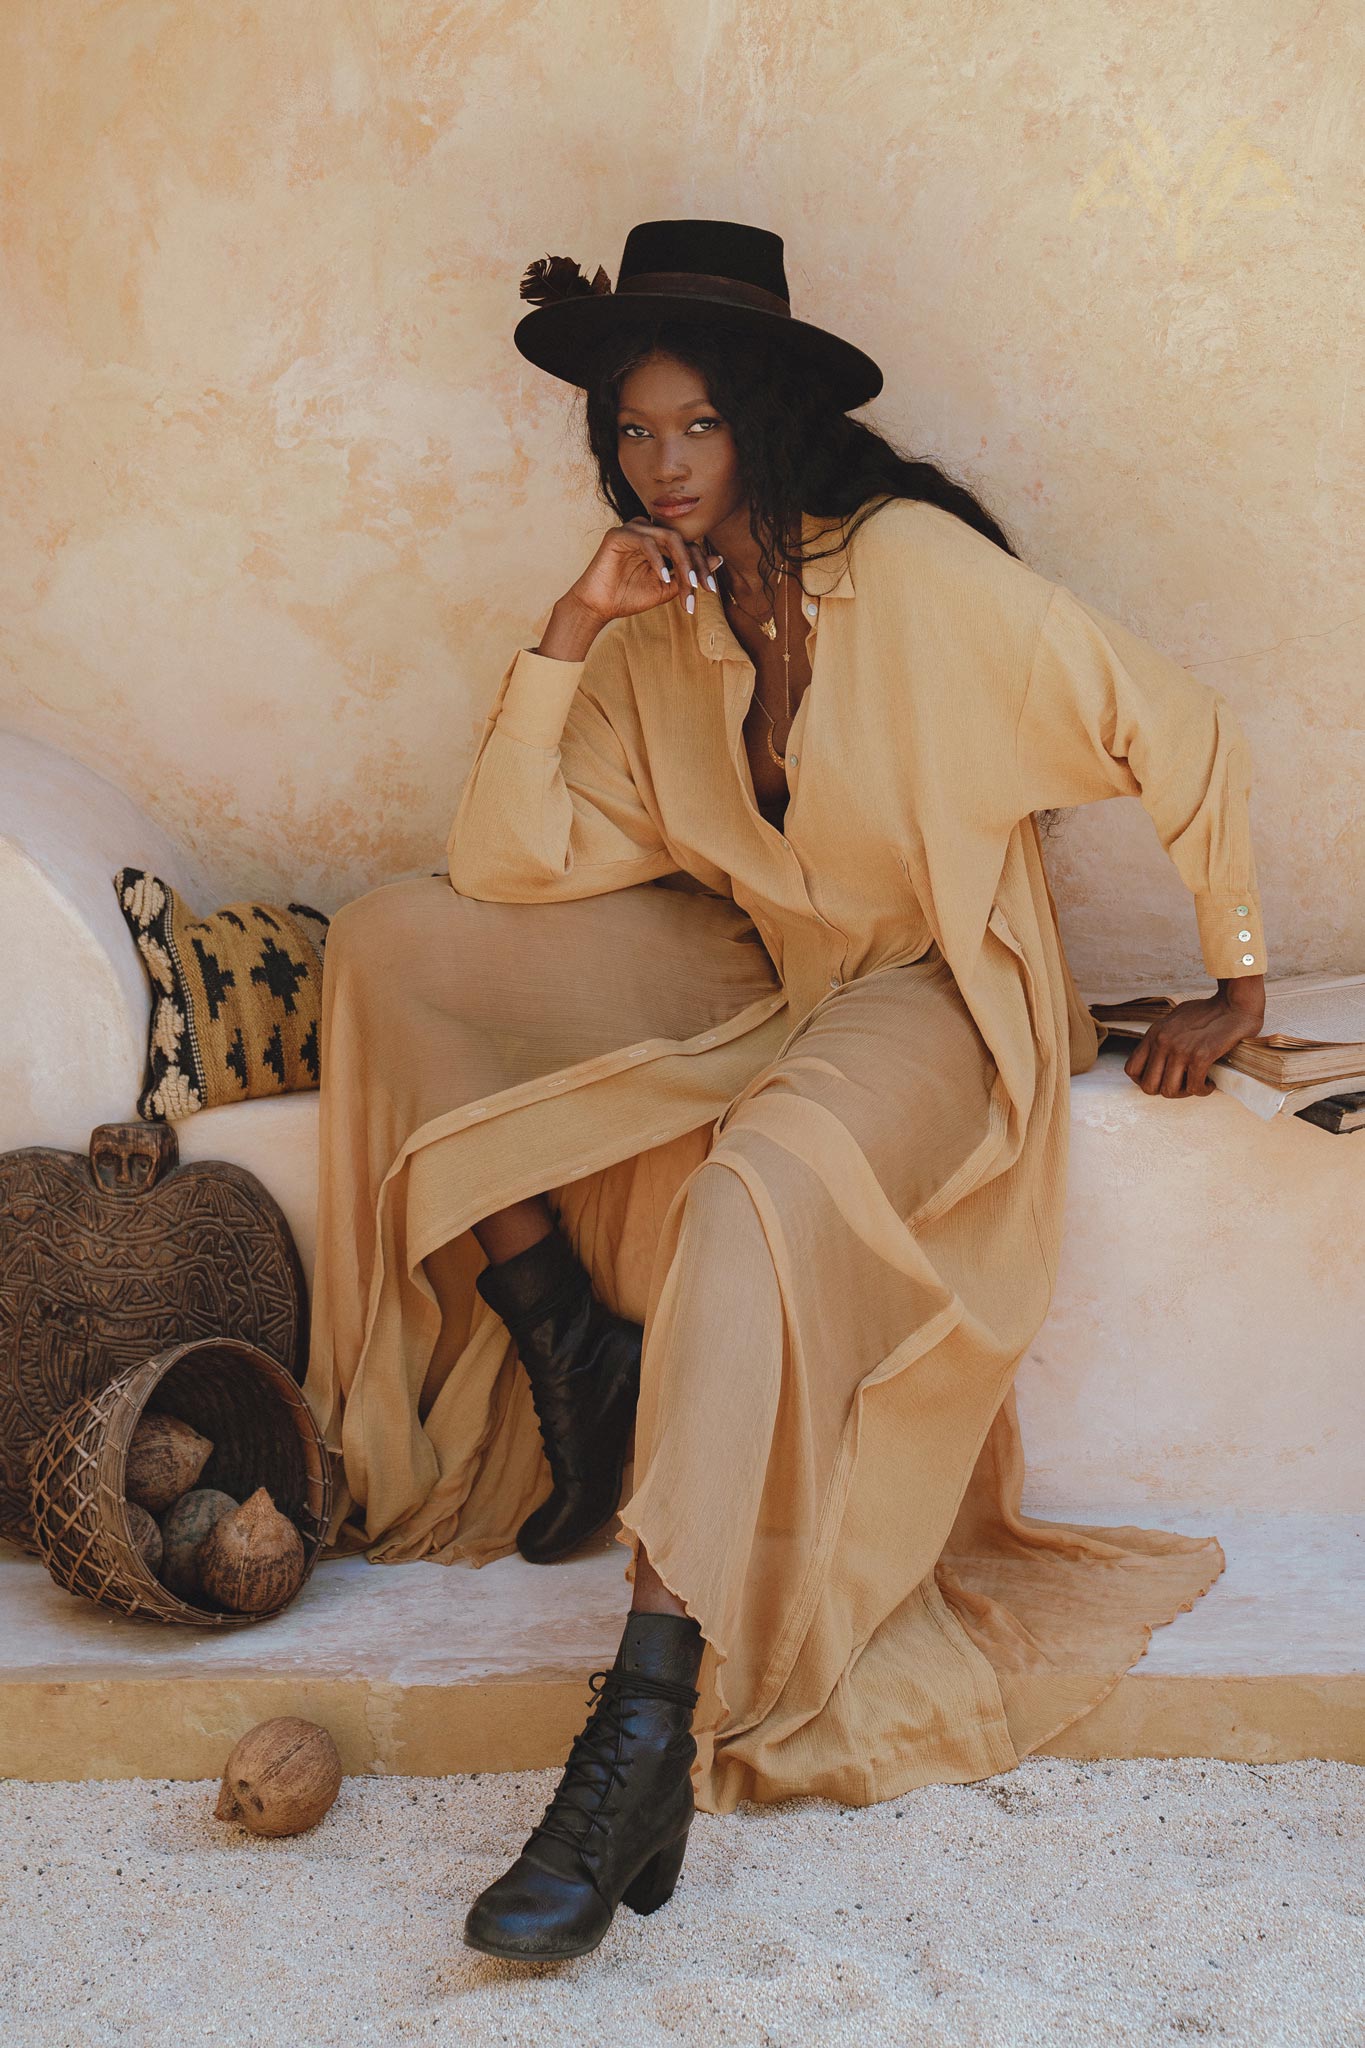 Get the perfect look with the Ochre Boho Shirt Dress by Aya Sacred Wear